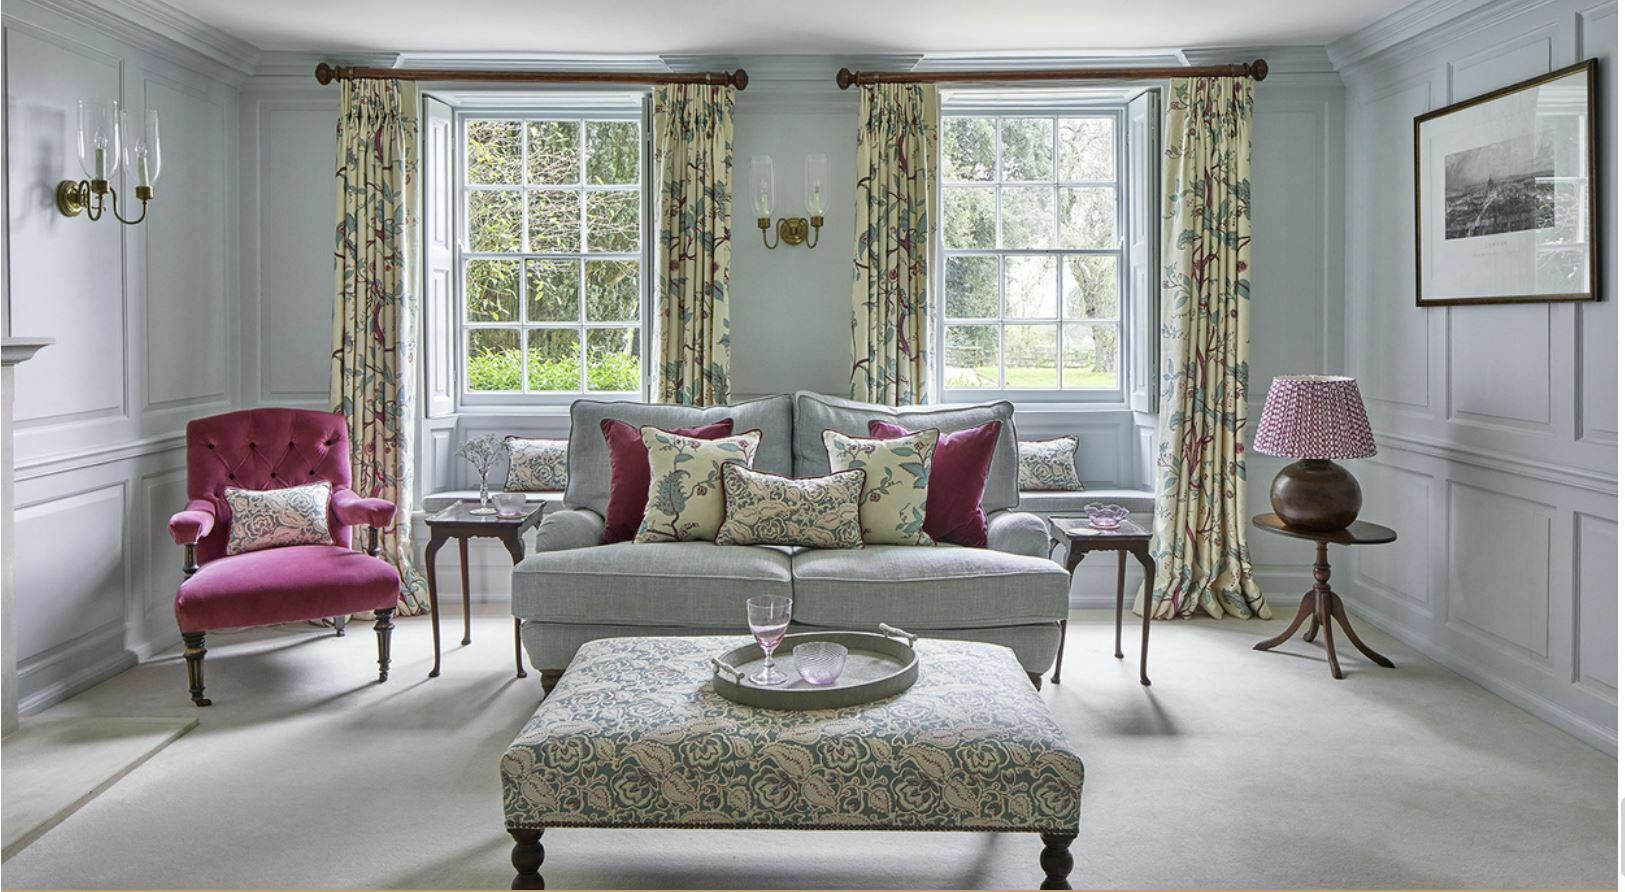 Featured on House & Garden's 'The List',Lucy Marsh Interiors